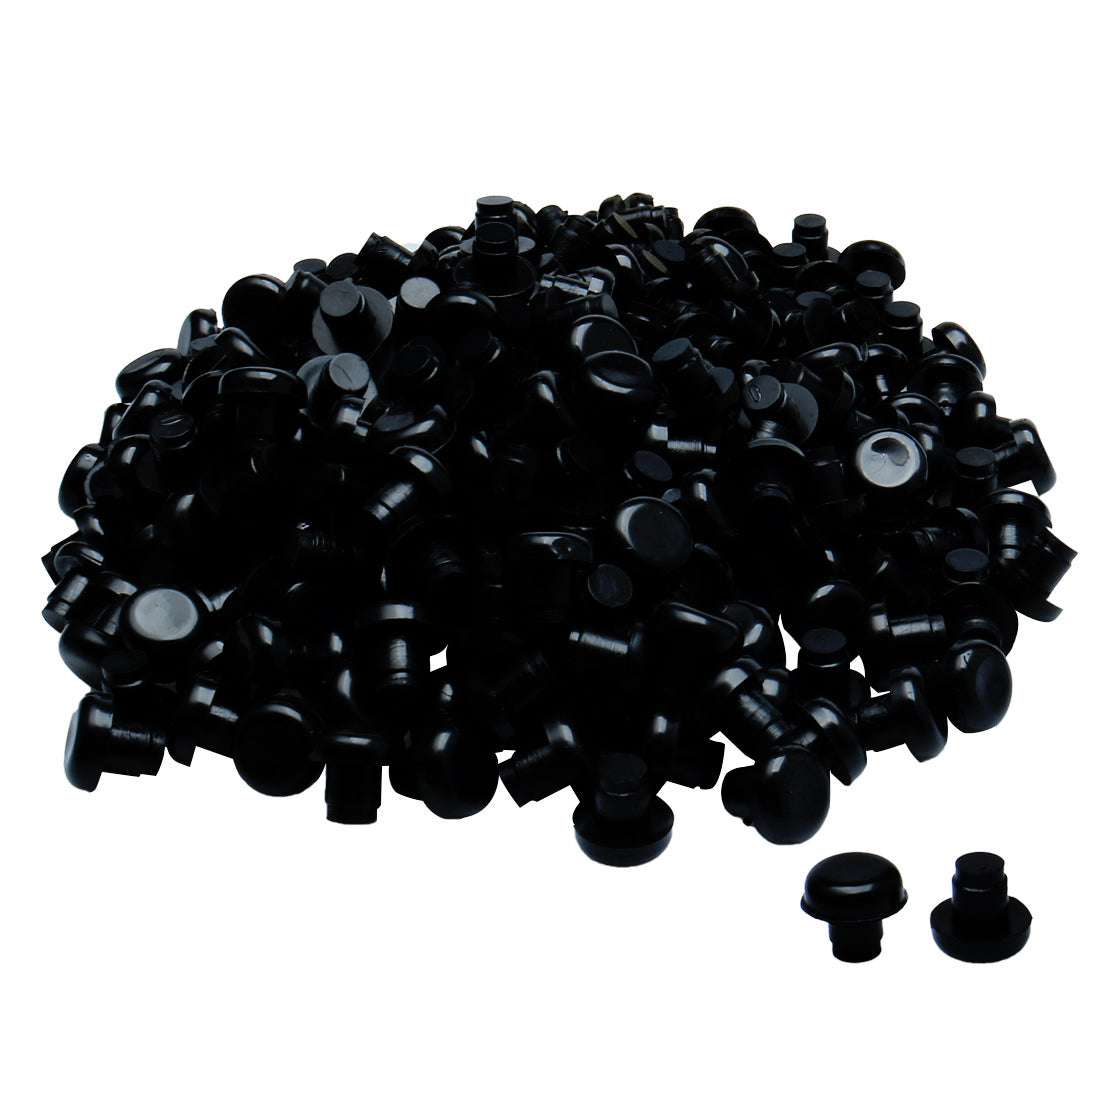 uxcell Uxcell 200pcs 8mm Black Stem Bumpers Glide, Patio Outdoor Furniture Glass Table Top Anti-collision Embedded